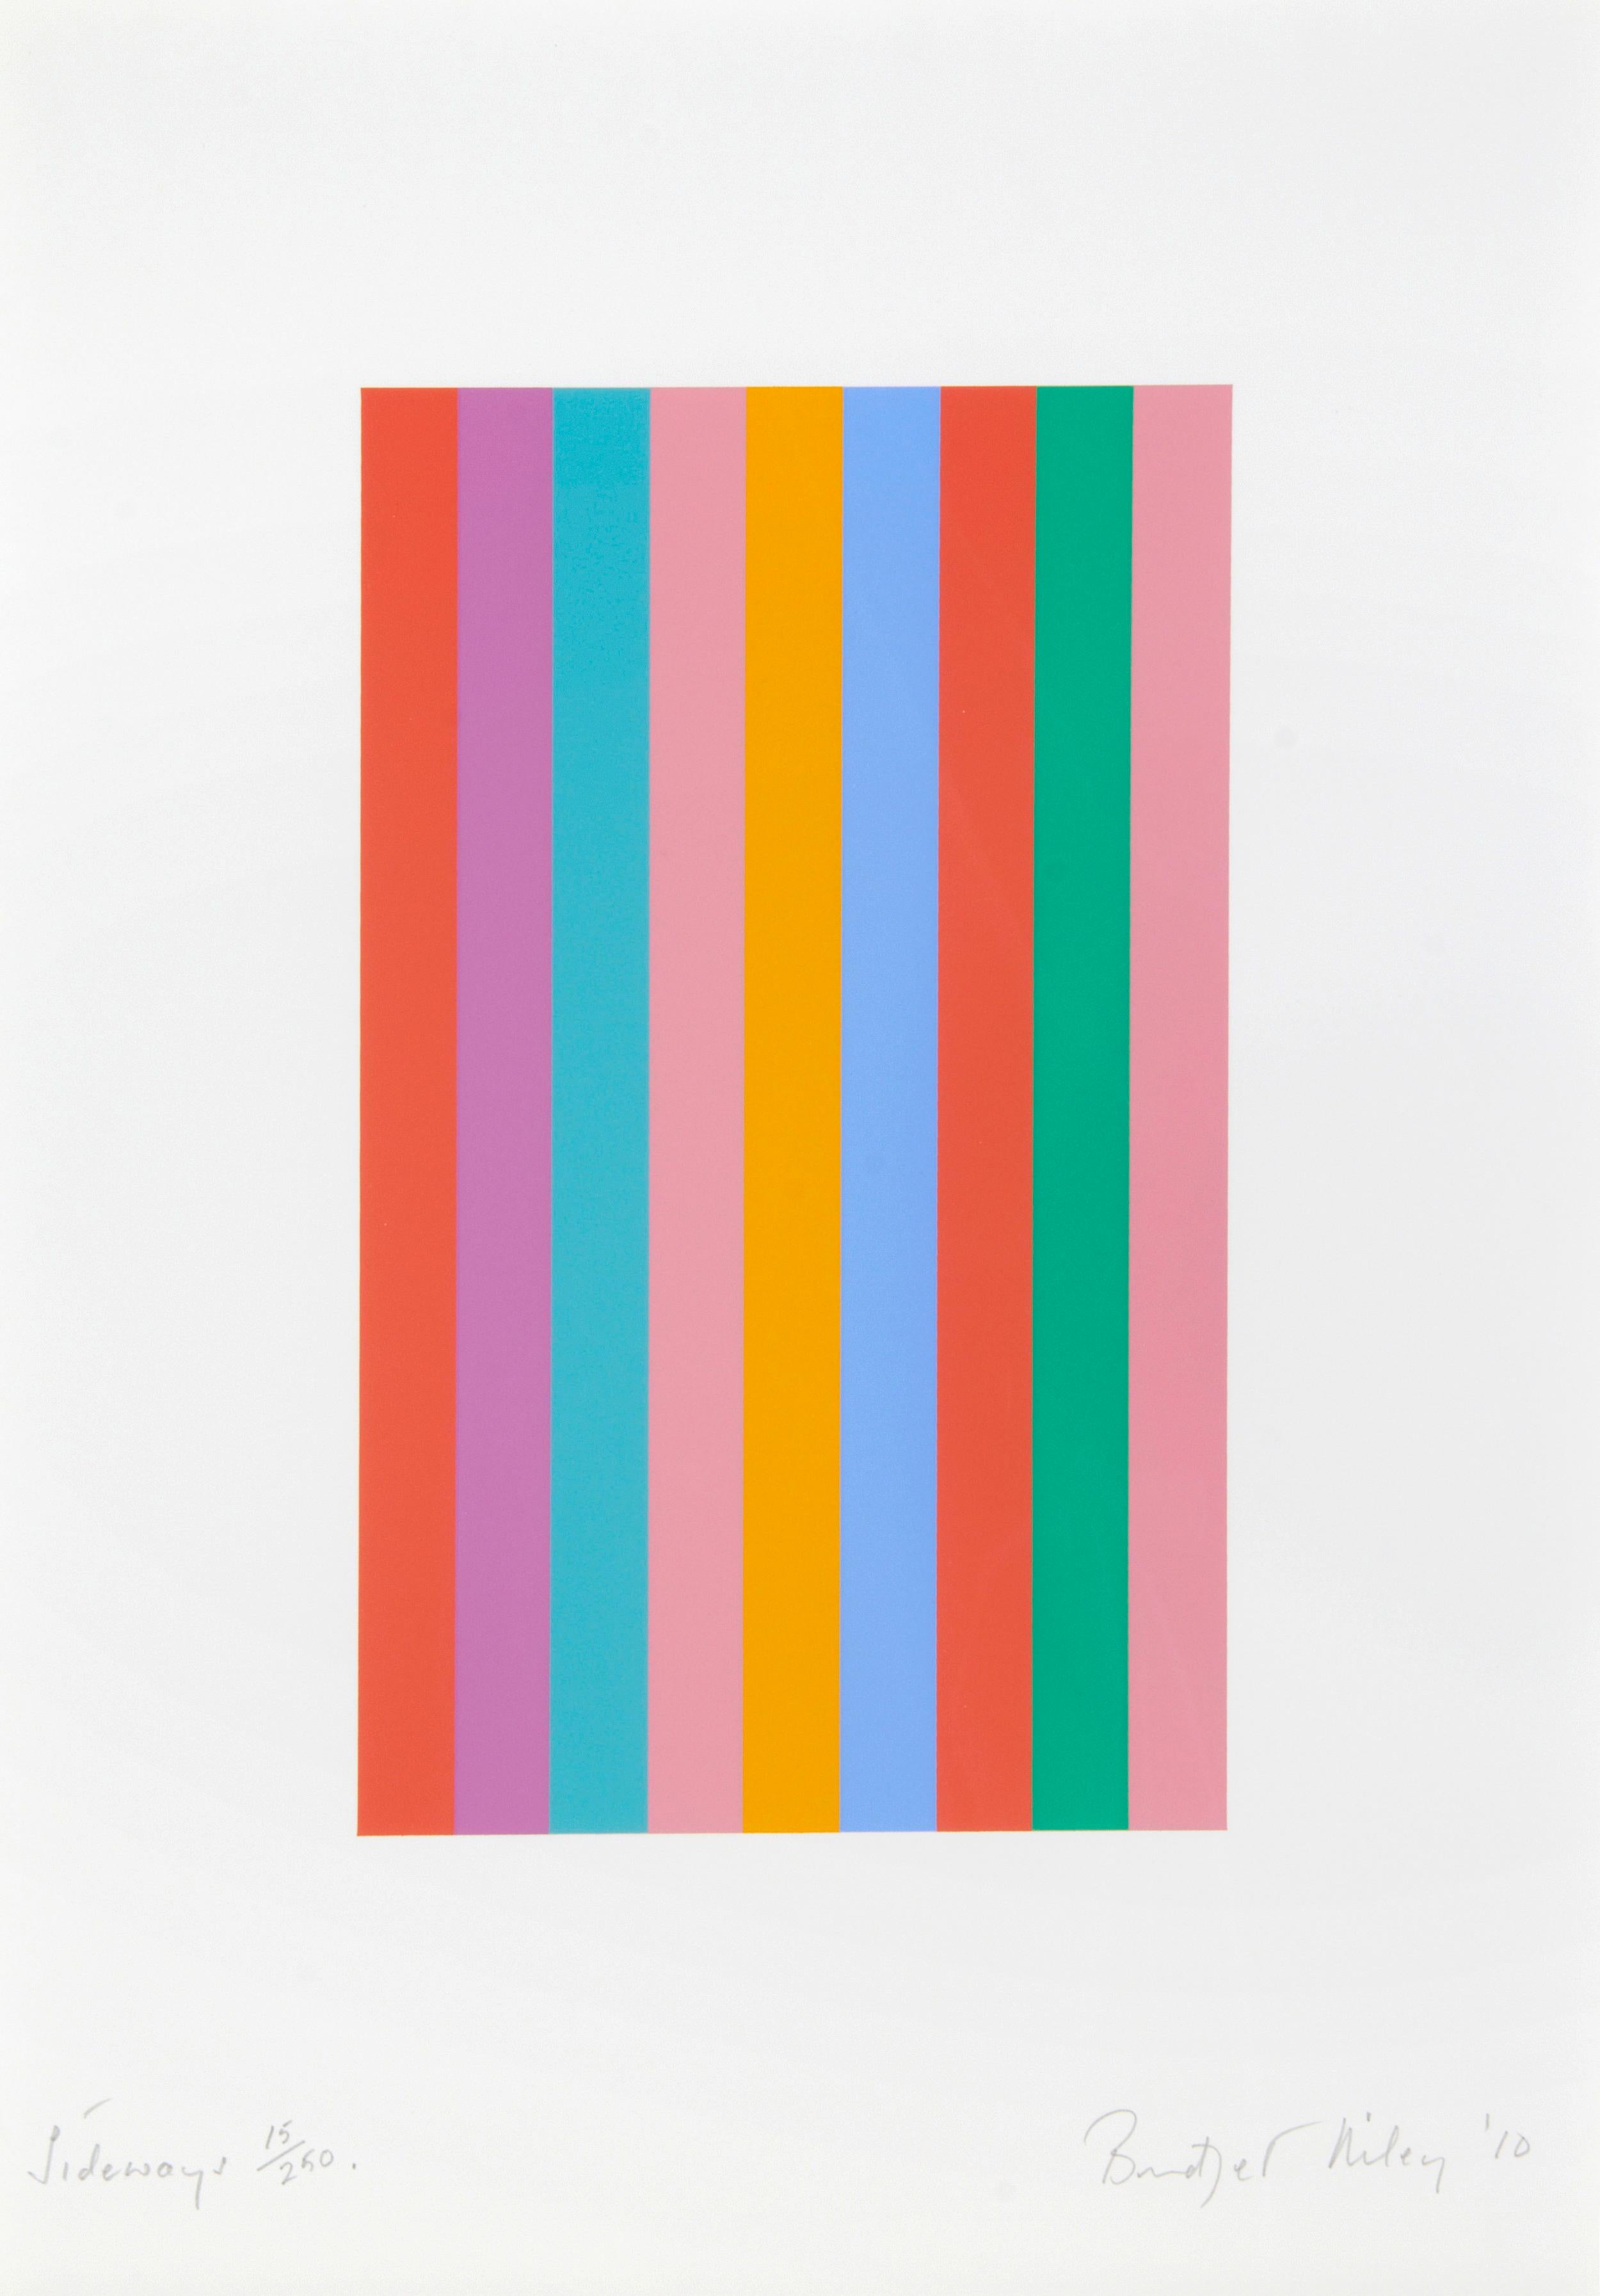 Sideways, 2011
Bridget Riley

Screenprint in colours, on Fabriano 5 wove
Signed, titled, dated and numbered from the edition of 250
Printed by Artizan Editions, Hove
Image: 29 × 17 cm (11.4 × 6.8 in)
Sheet: 46.2 × 32.5 cm (18.4 × 12.8